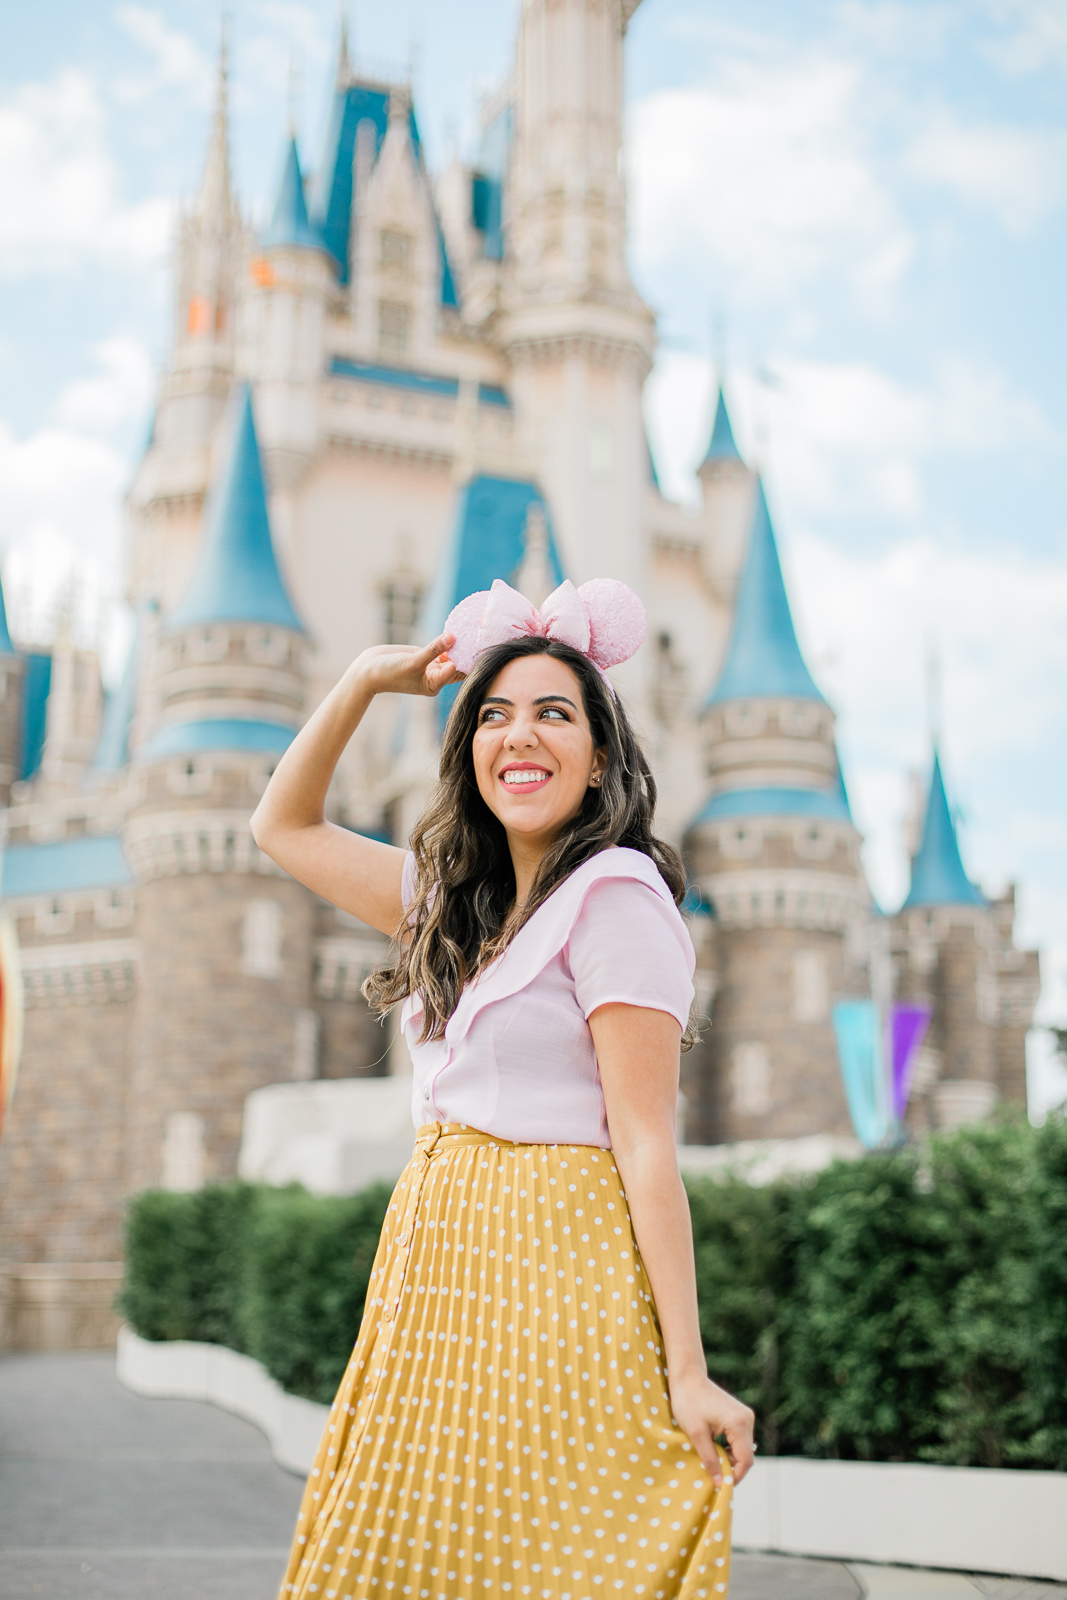 A cute fresh and modern take on my main gal Minnie Mouse! This Spring Minnie Mouse Disneybound is the perfect balance of chic and colorful.